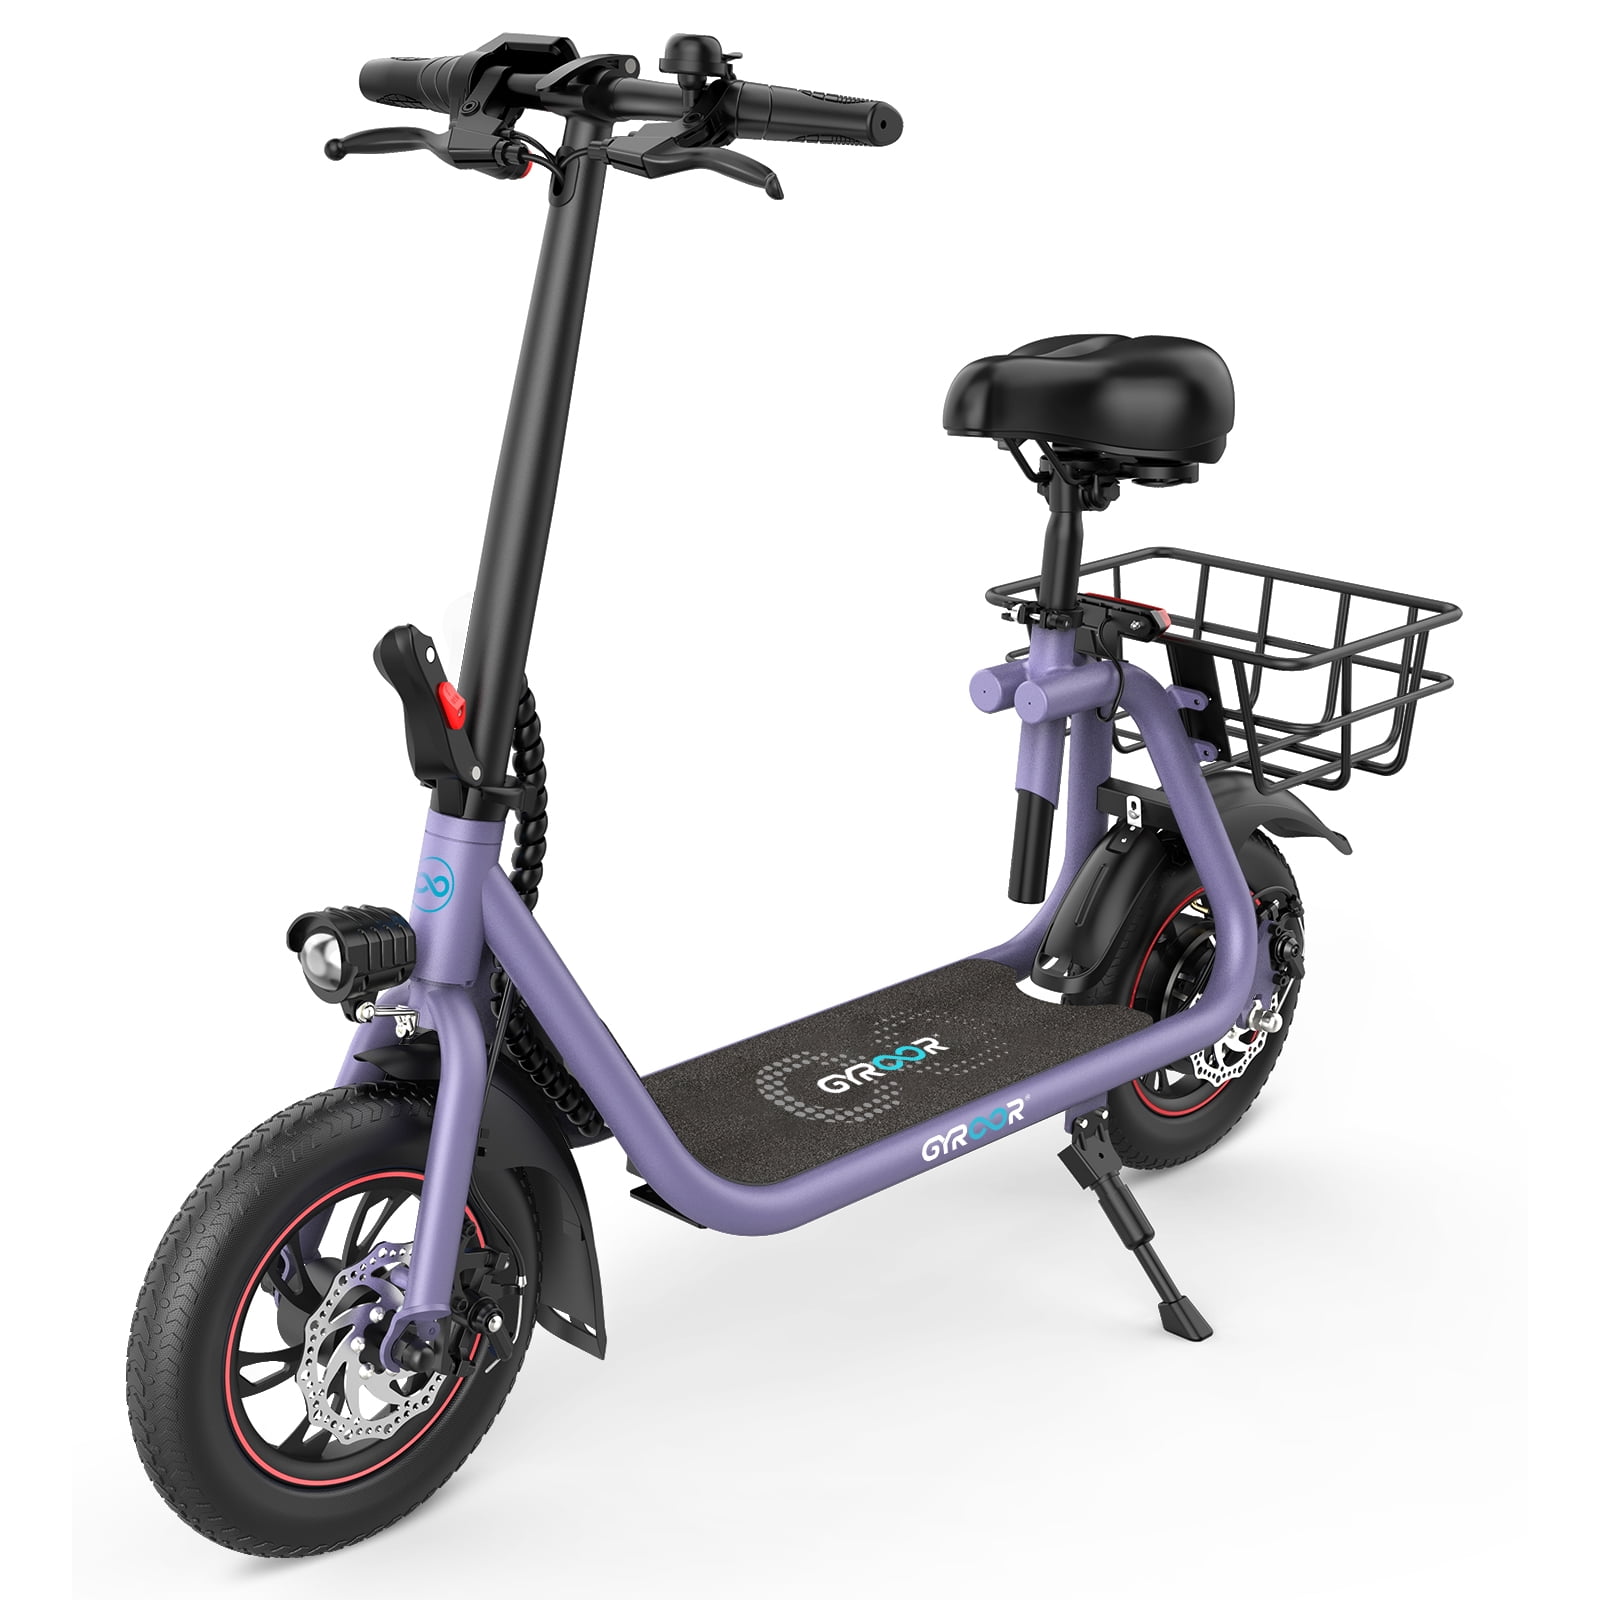 GYROOR C1 450W Electric Scooter with Seat for Adults, Max Speed 15.5Mph Up  to 21 Miles Range, 12 Tire for Commuting Scooter with Basket